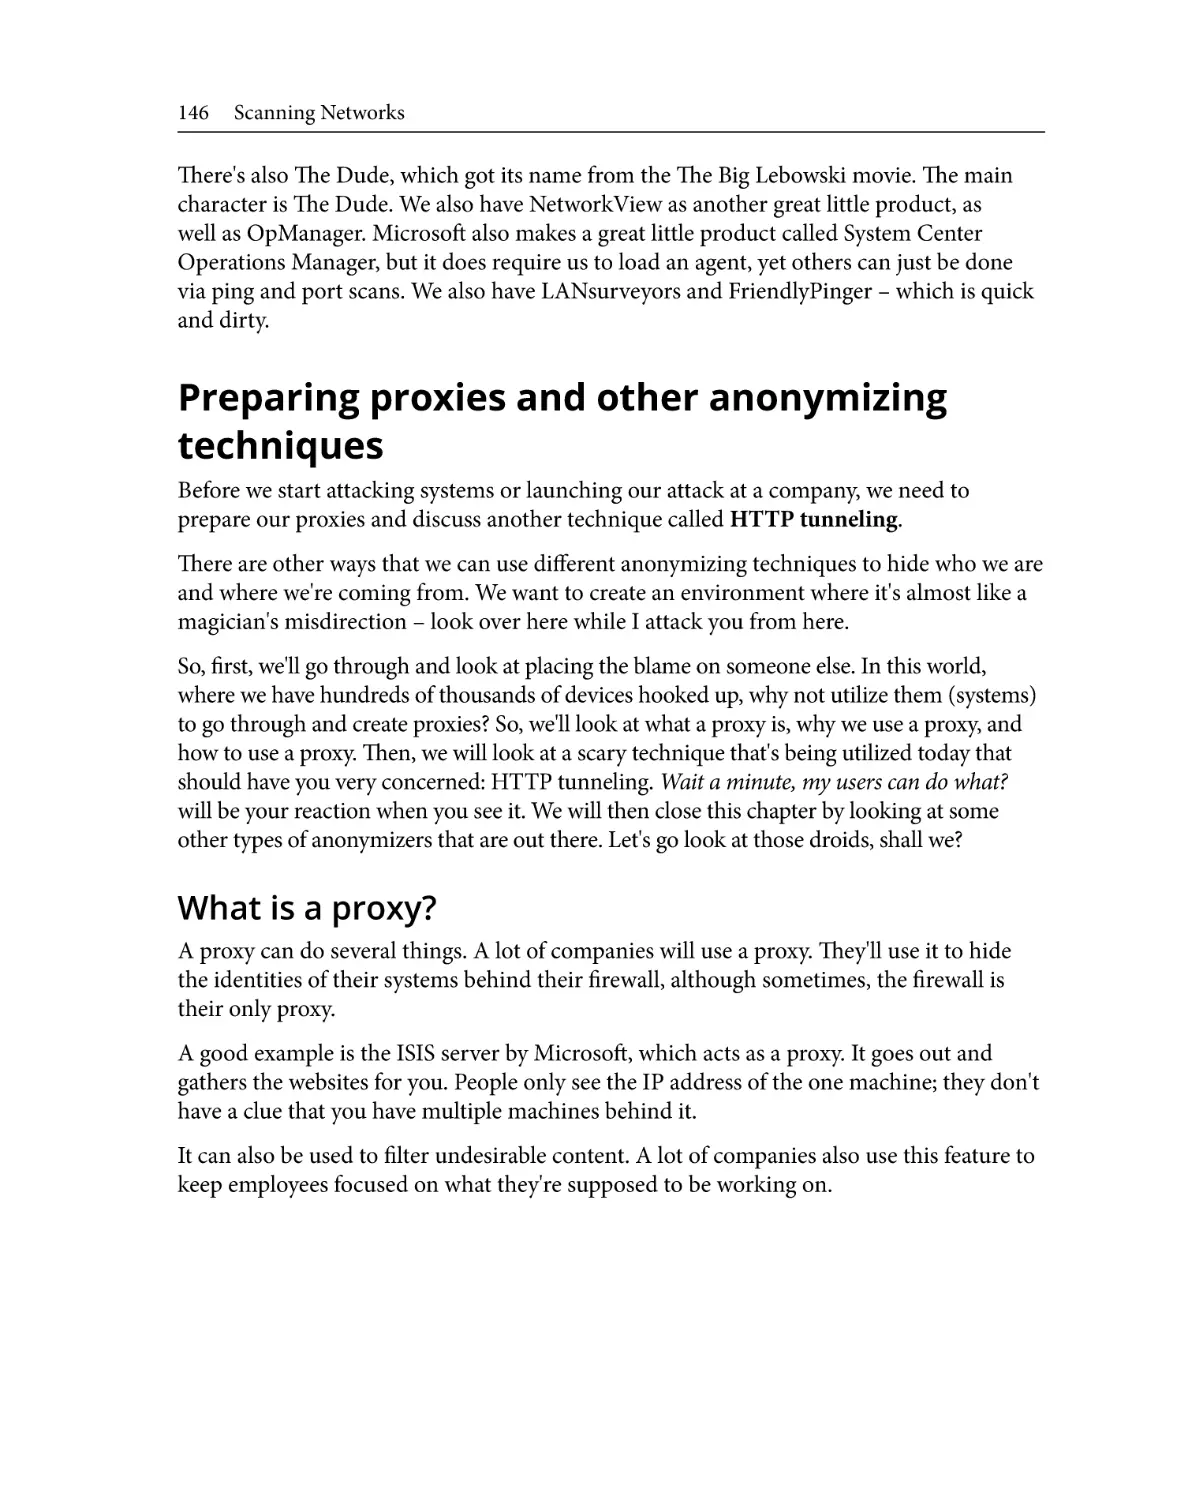 Preparing proxies and other anonymizing techniques
What is a proxy?